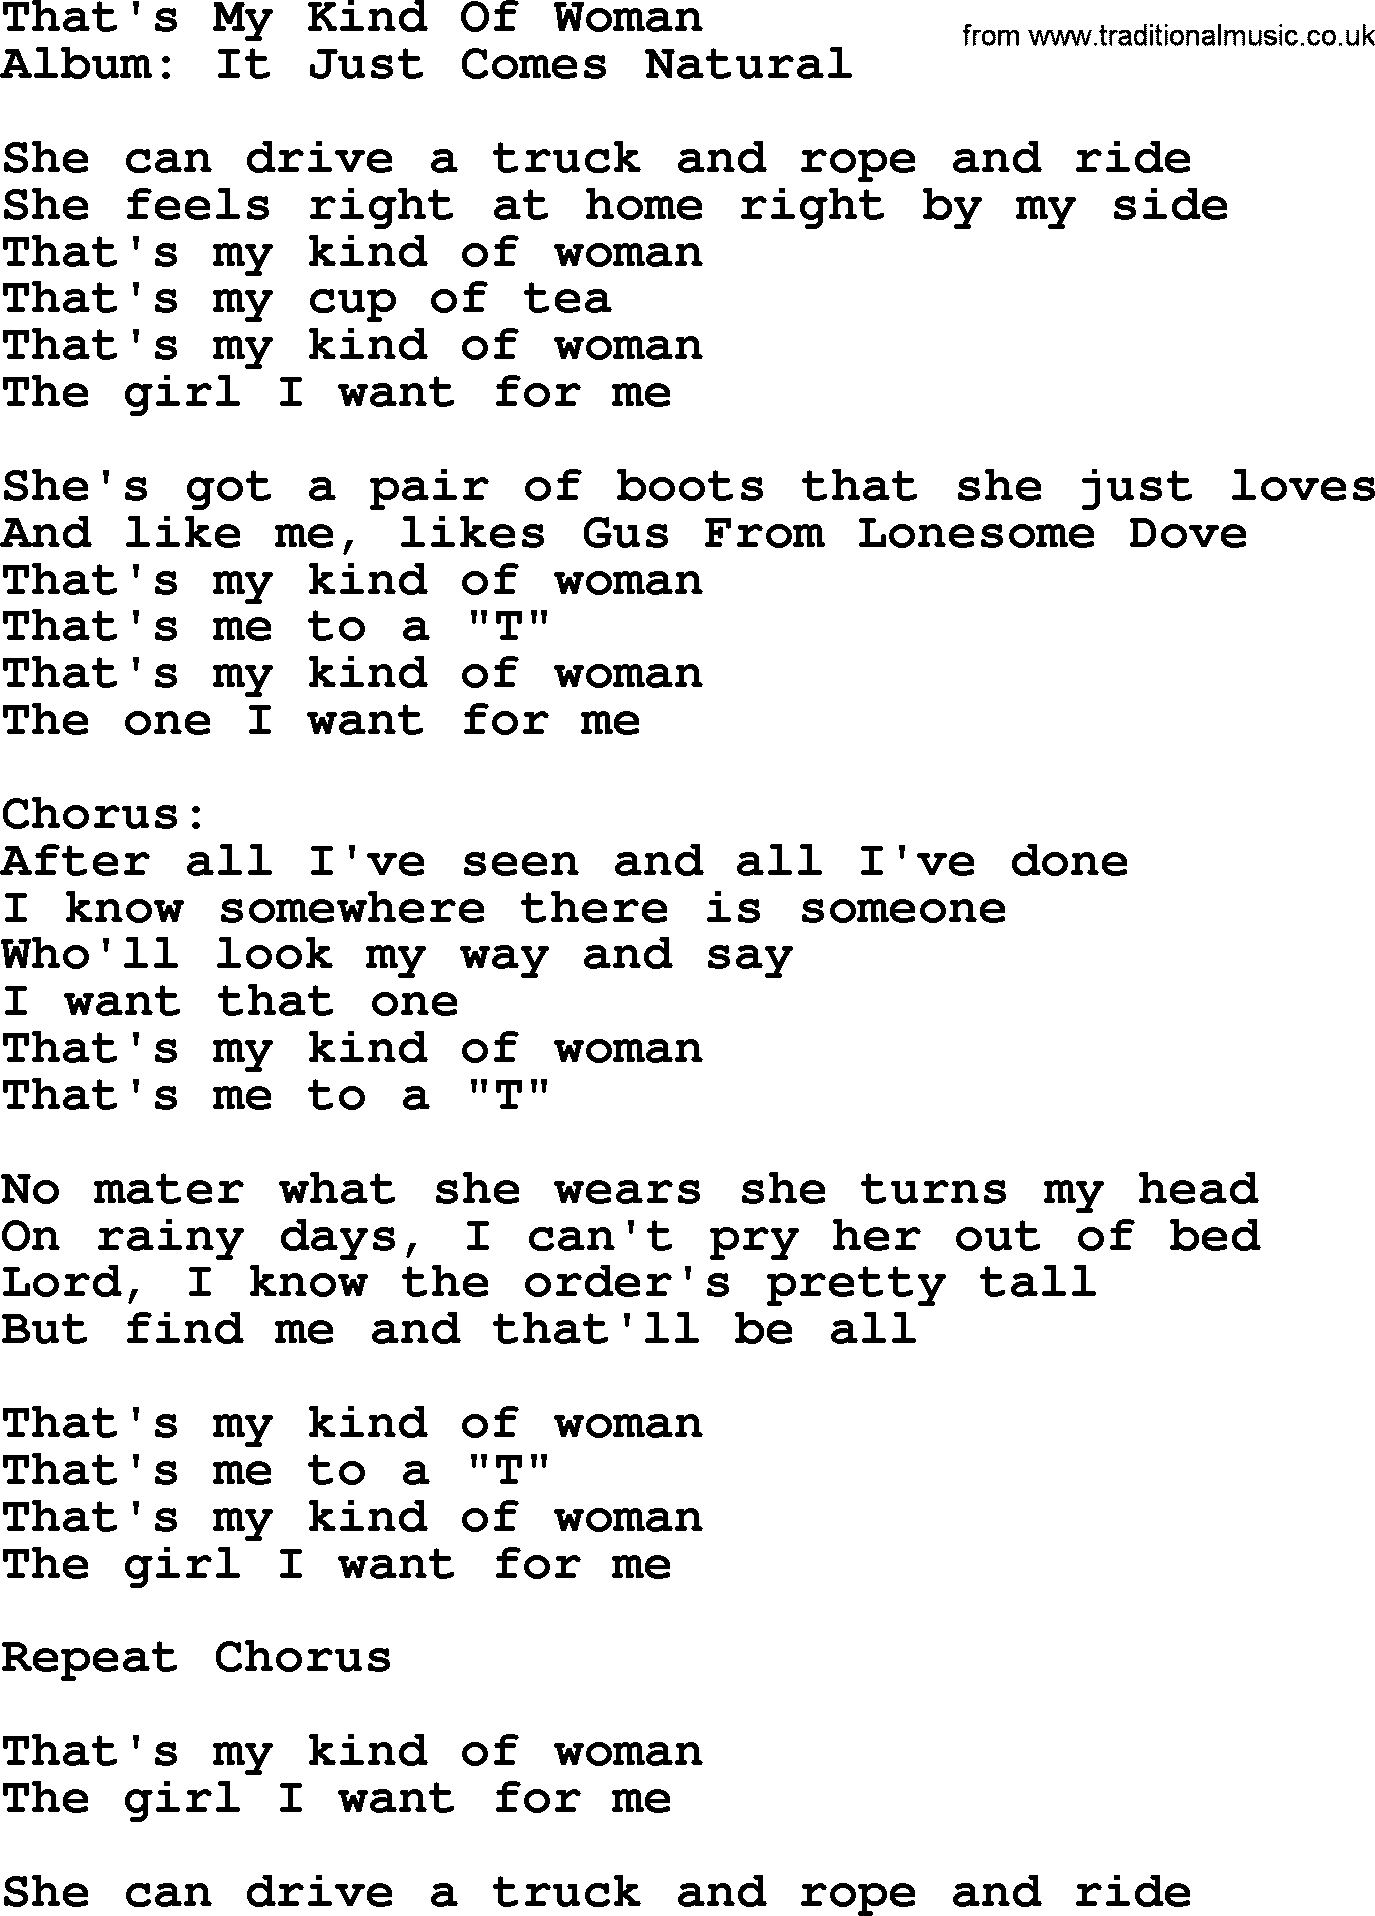 George Strait song: That's My Kind Of Woman, lyrics